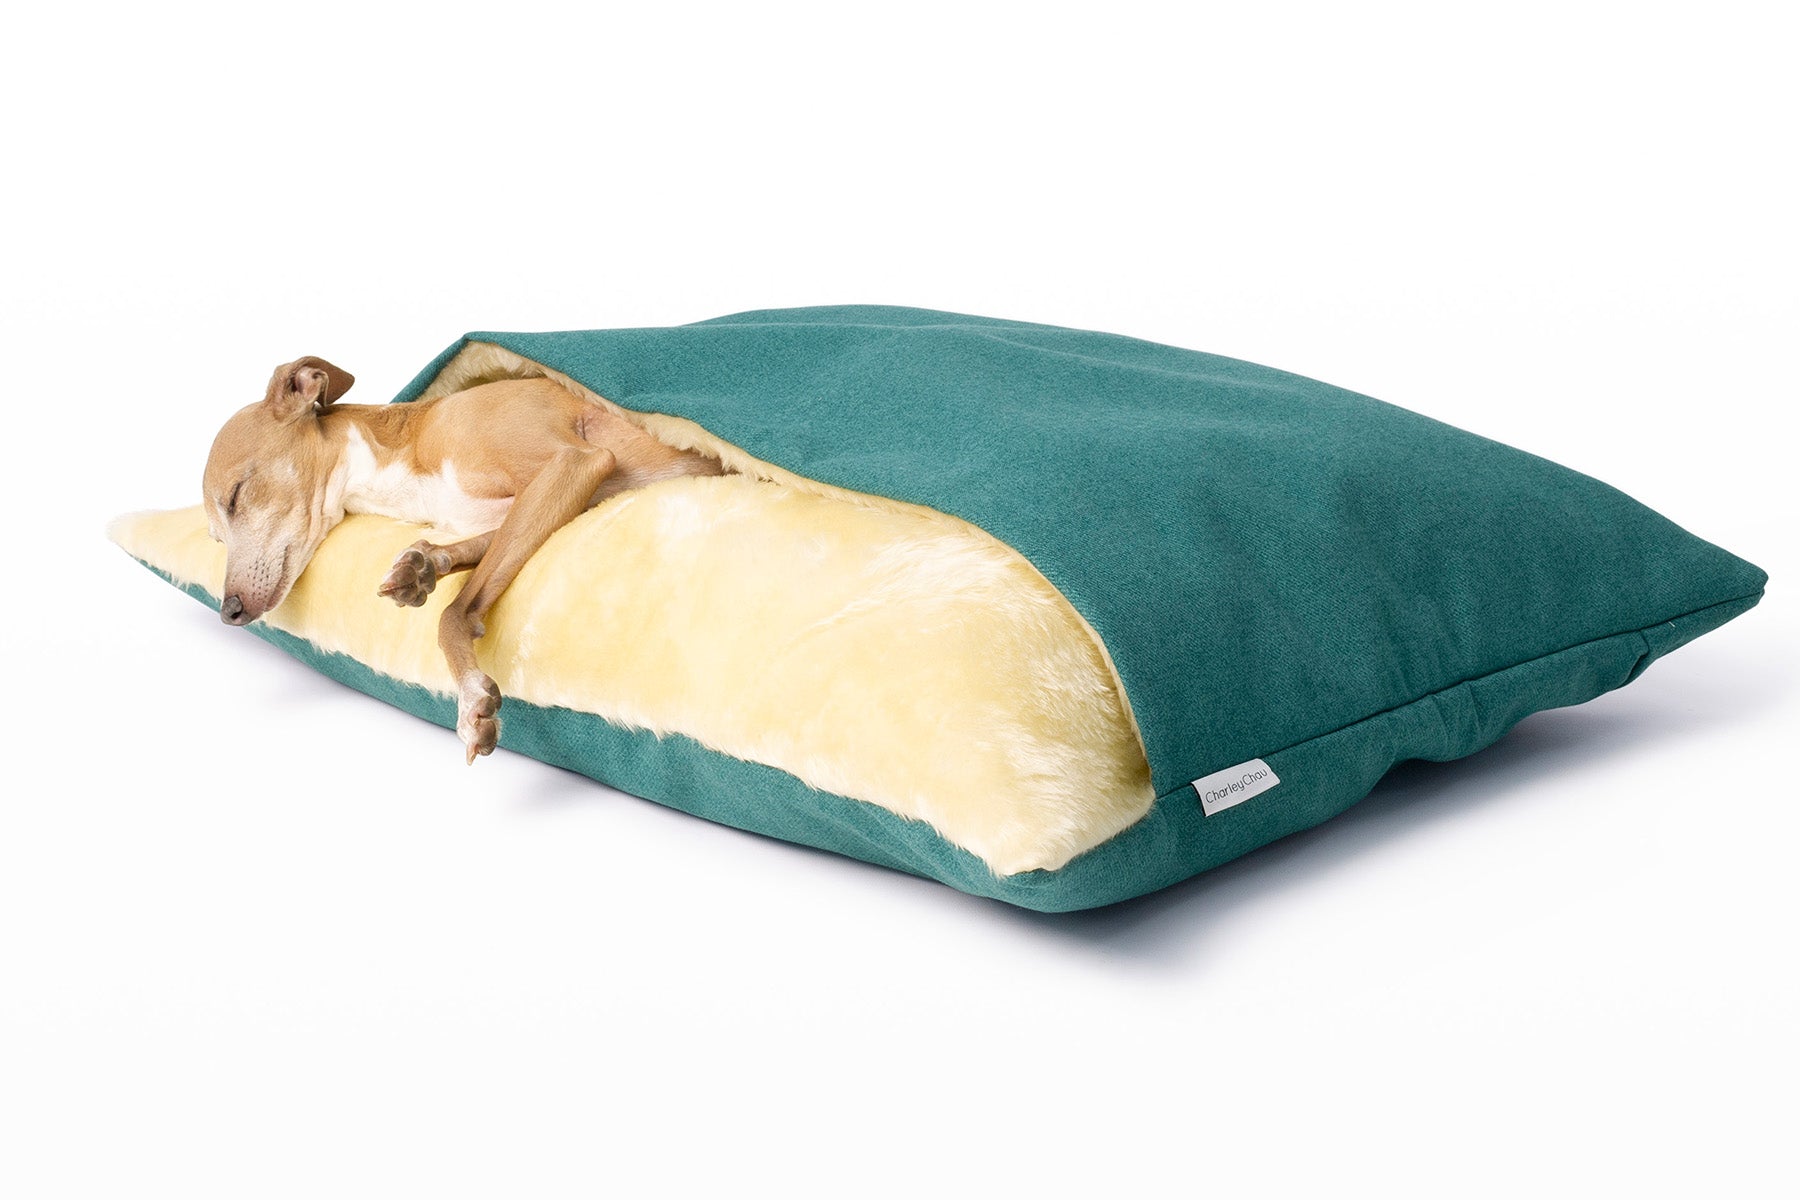 New for A/W 21 - The Snuggle Bed in Faroe